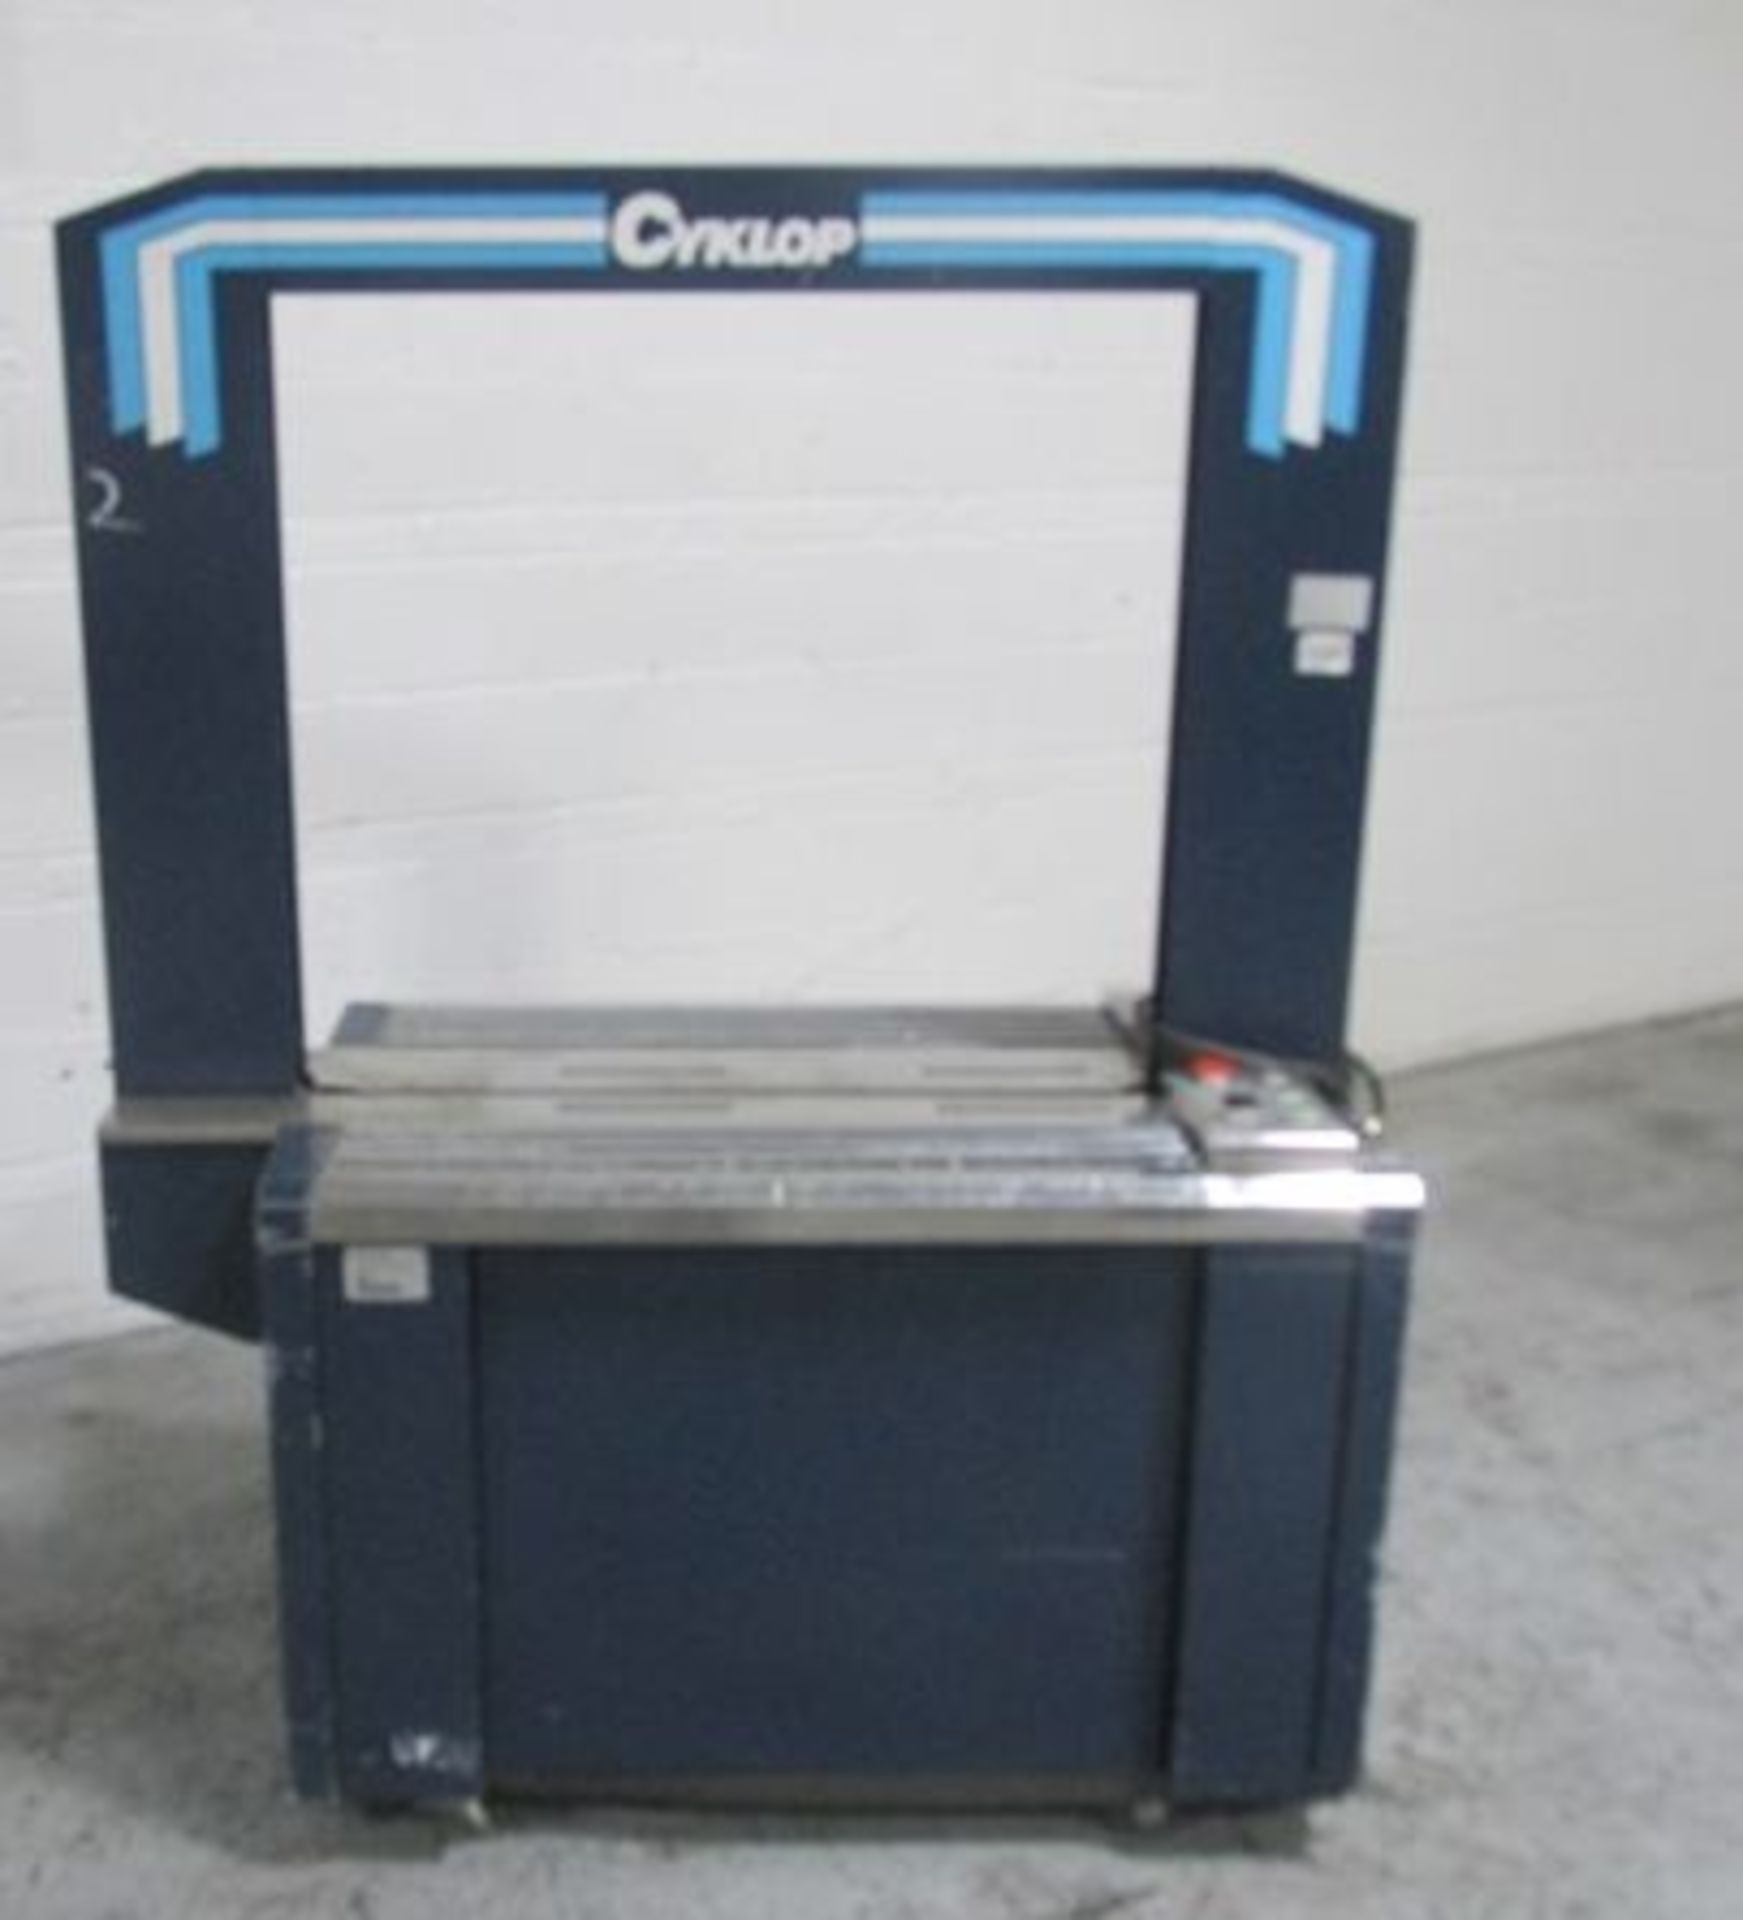 Cyklop Automatic Strapping Machine, Model ASM-1